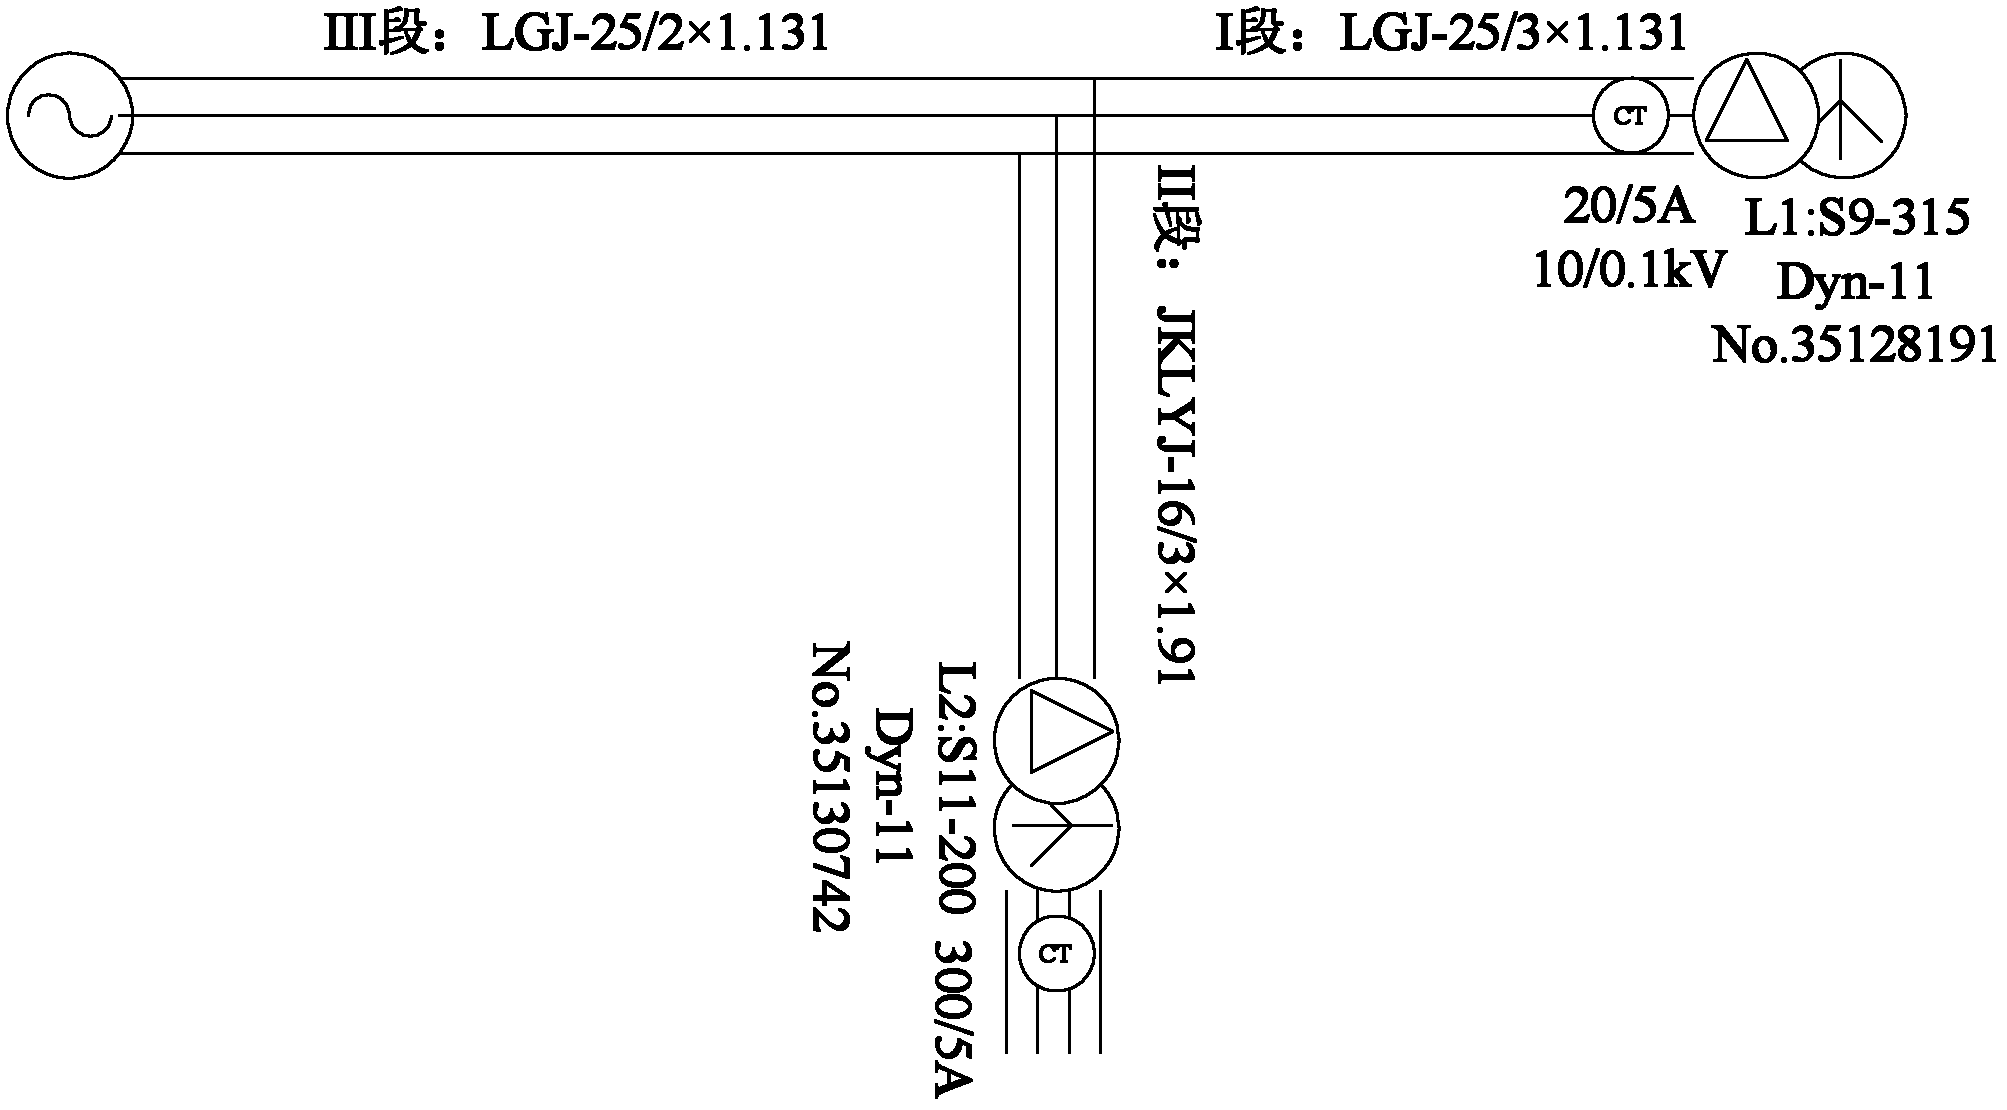 Electrical-information-acquisition-system-based theoretical line loss estimation method for distribution network